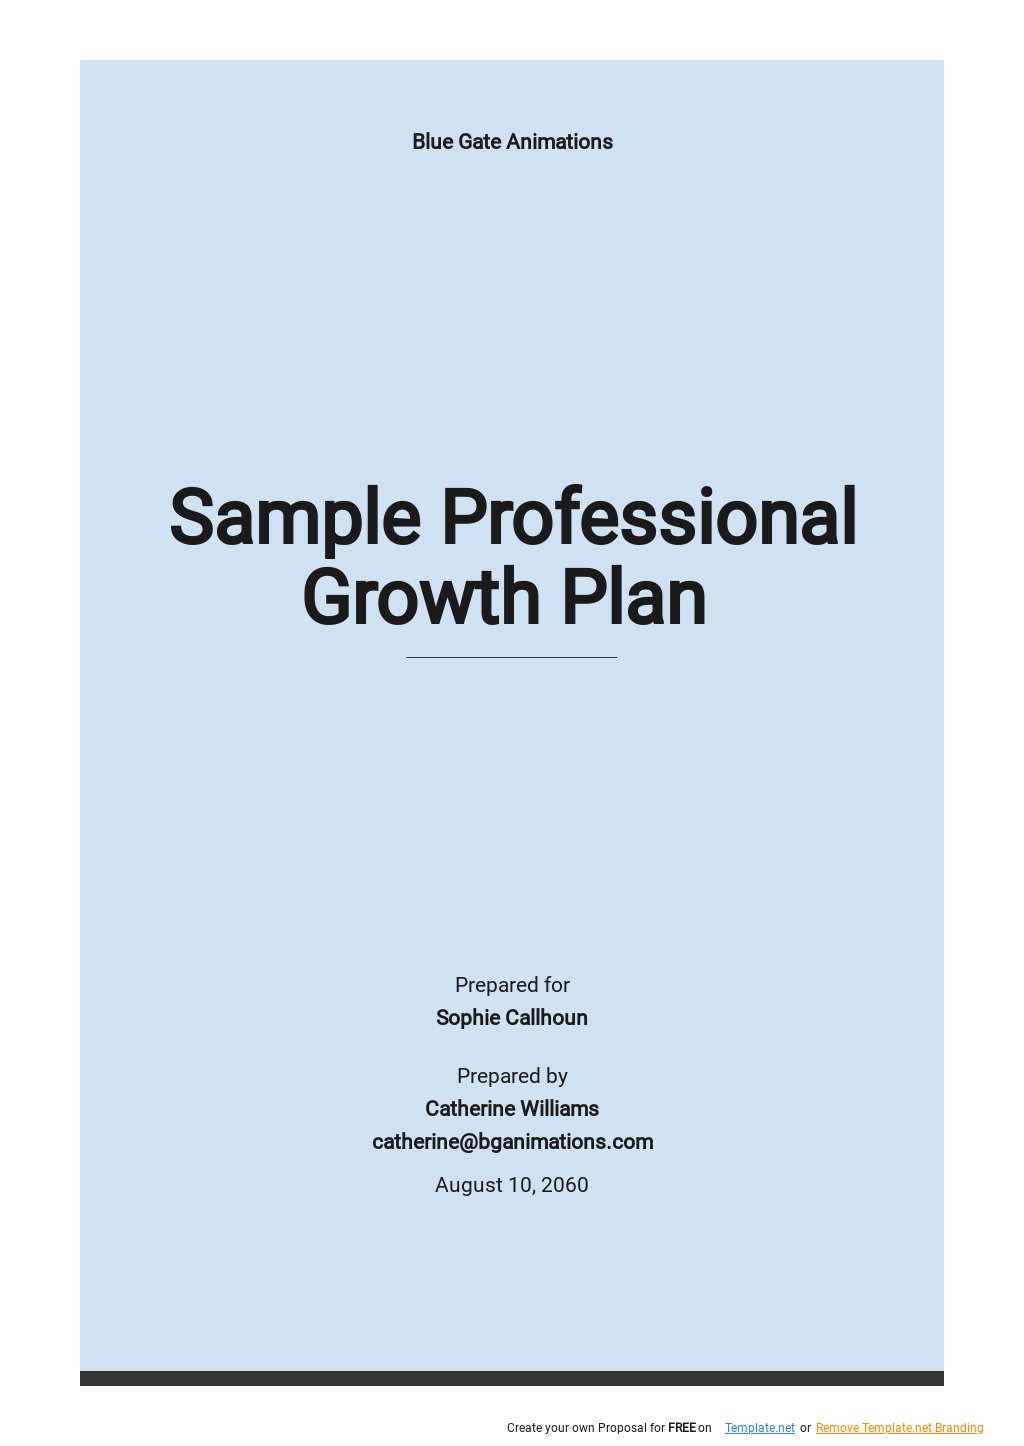 Professional Growth Plan Templates 9+ Docs, Free Downloads